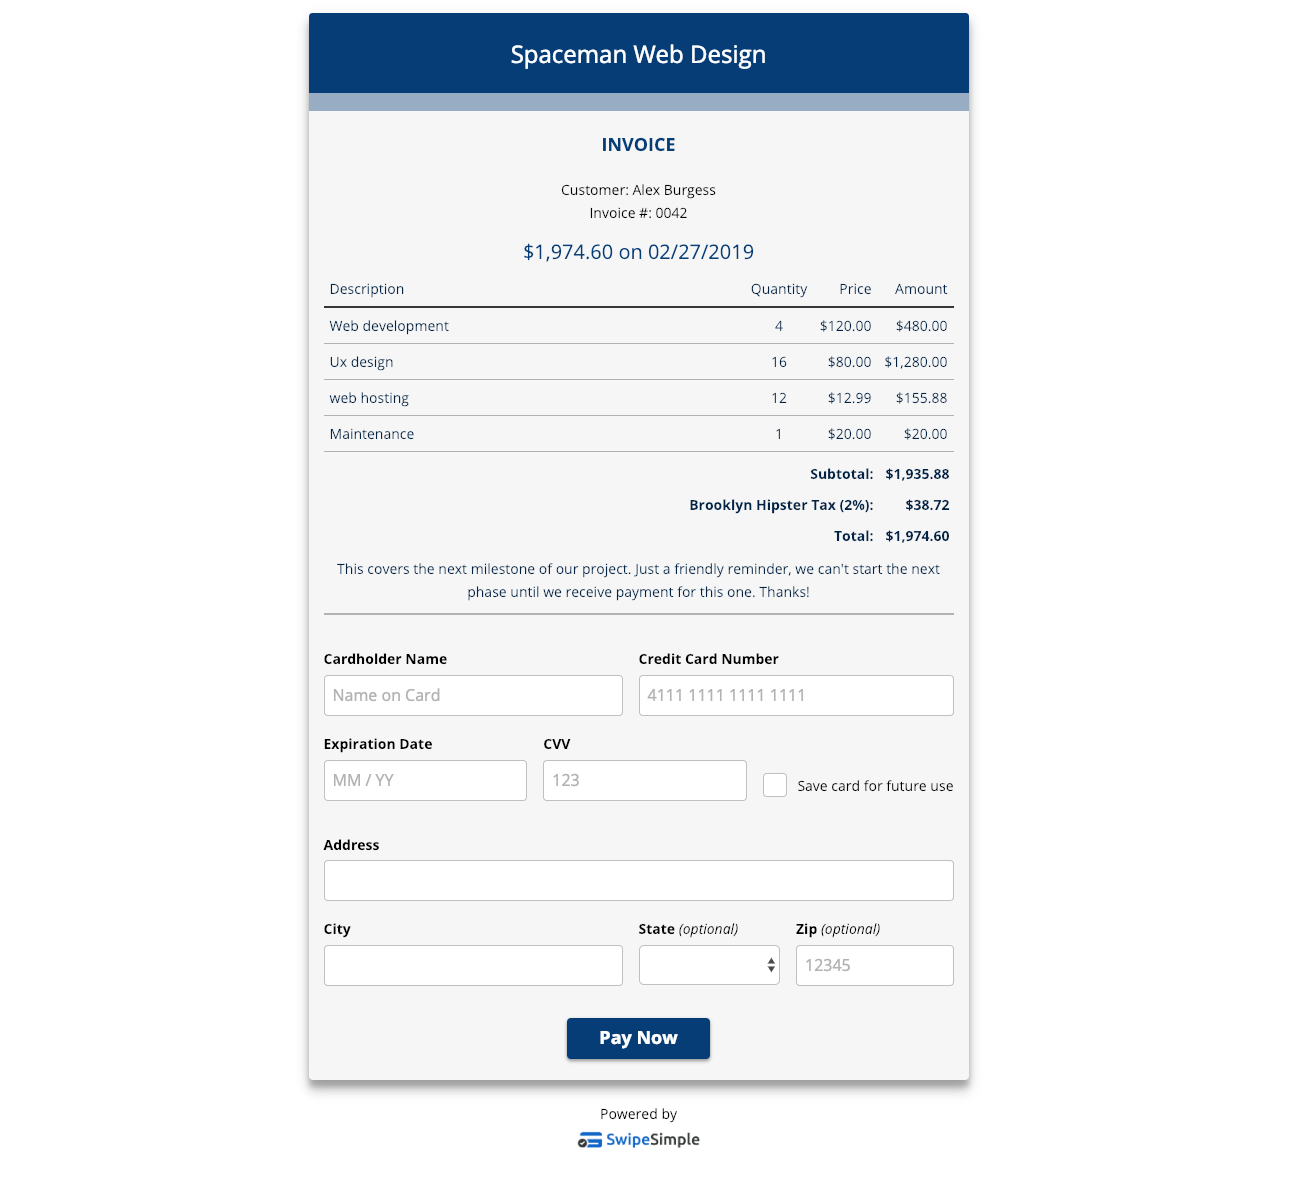 invoice_pay-page.png